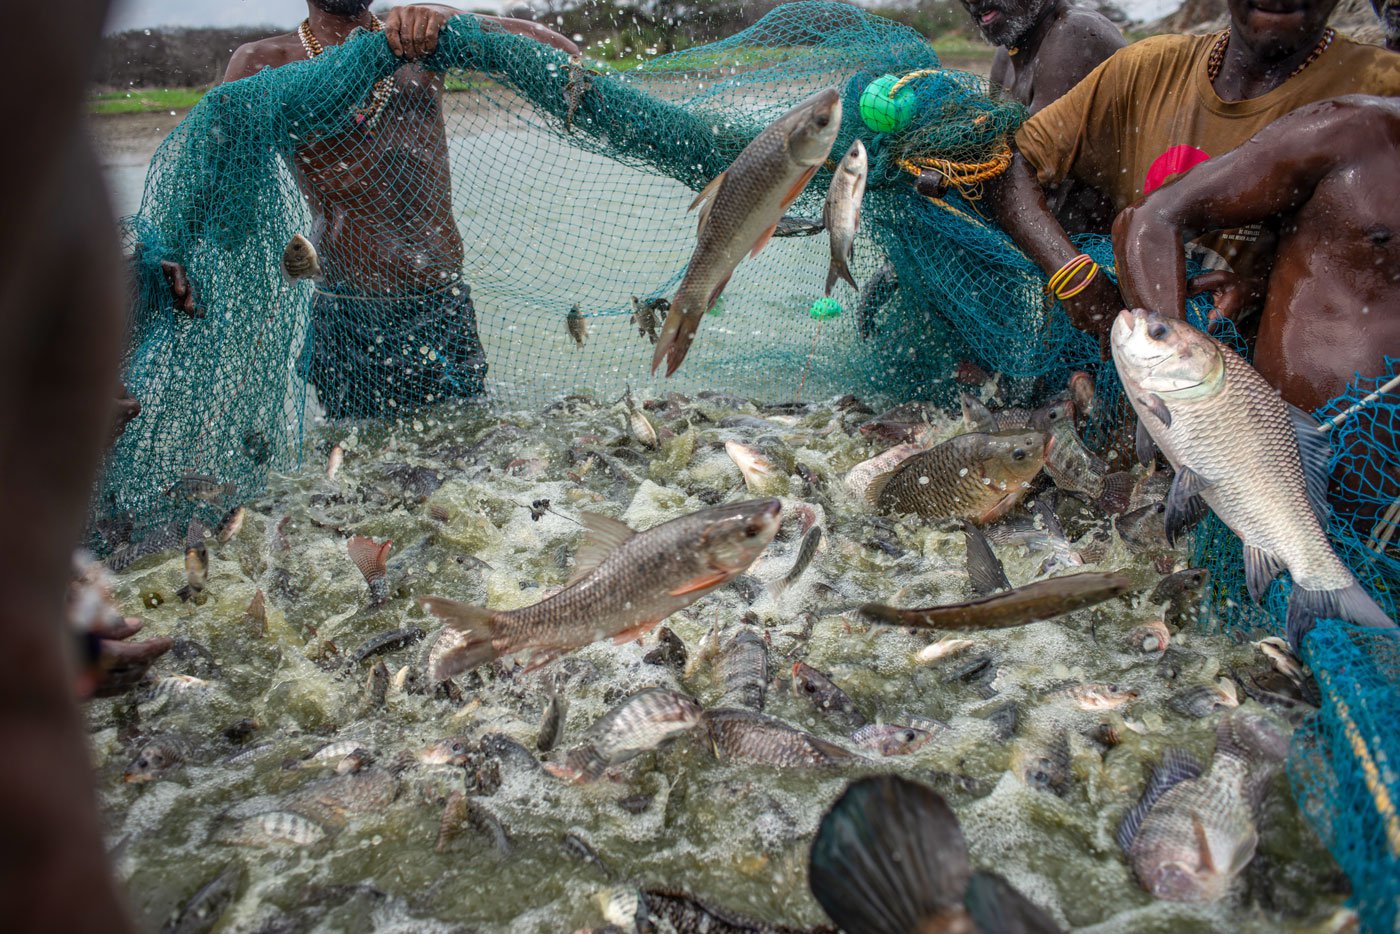 They move their catch towards shallow waters where temporary structures have been built to collect and store fish